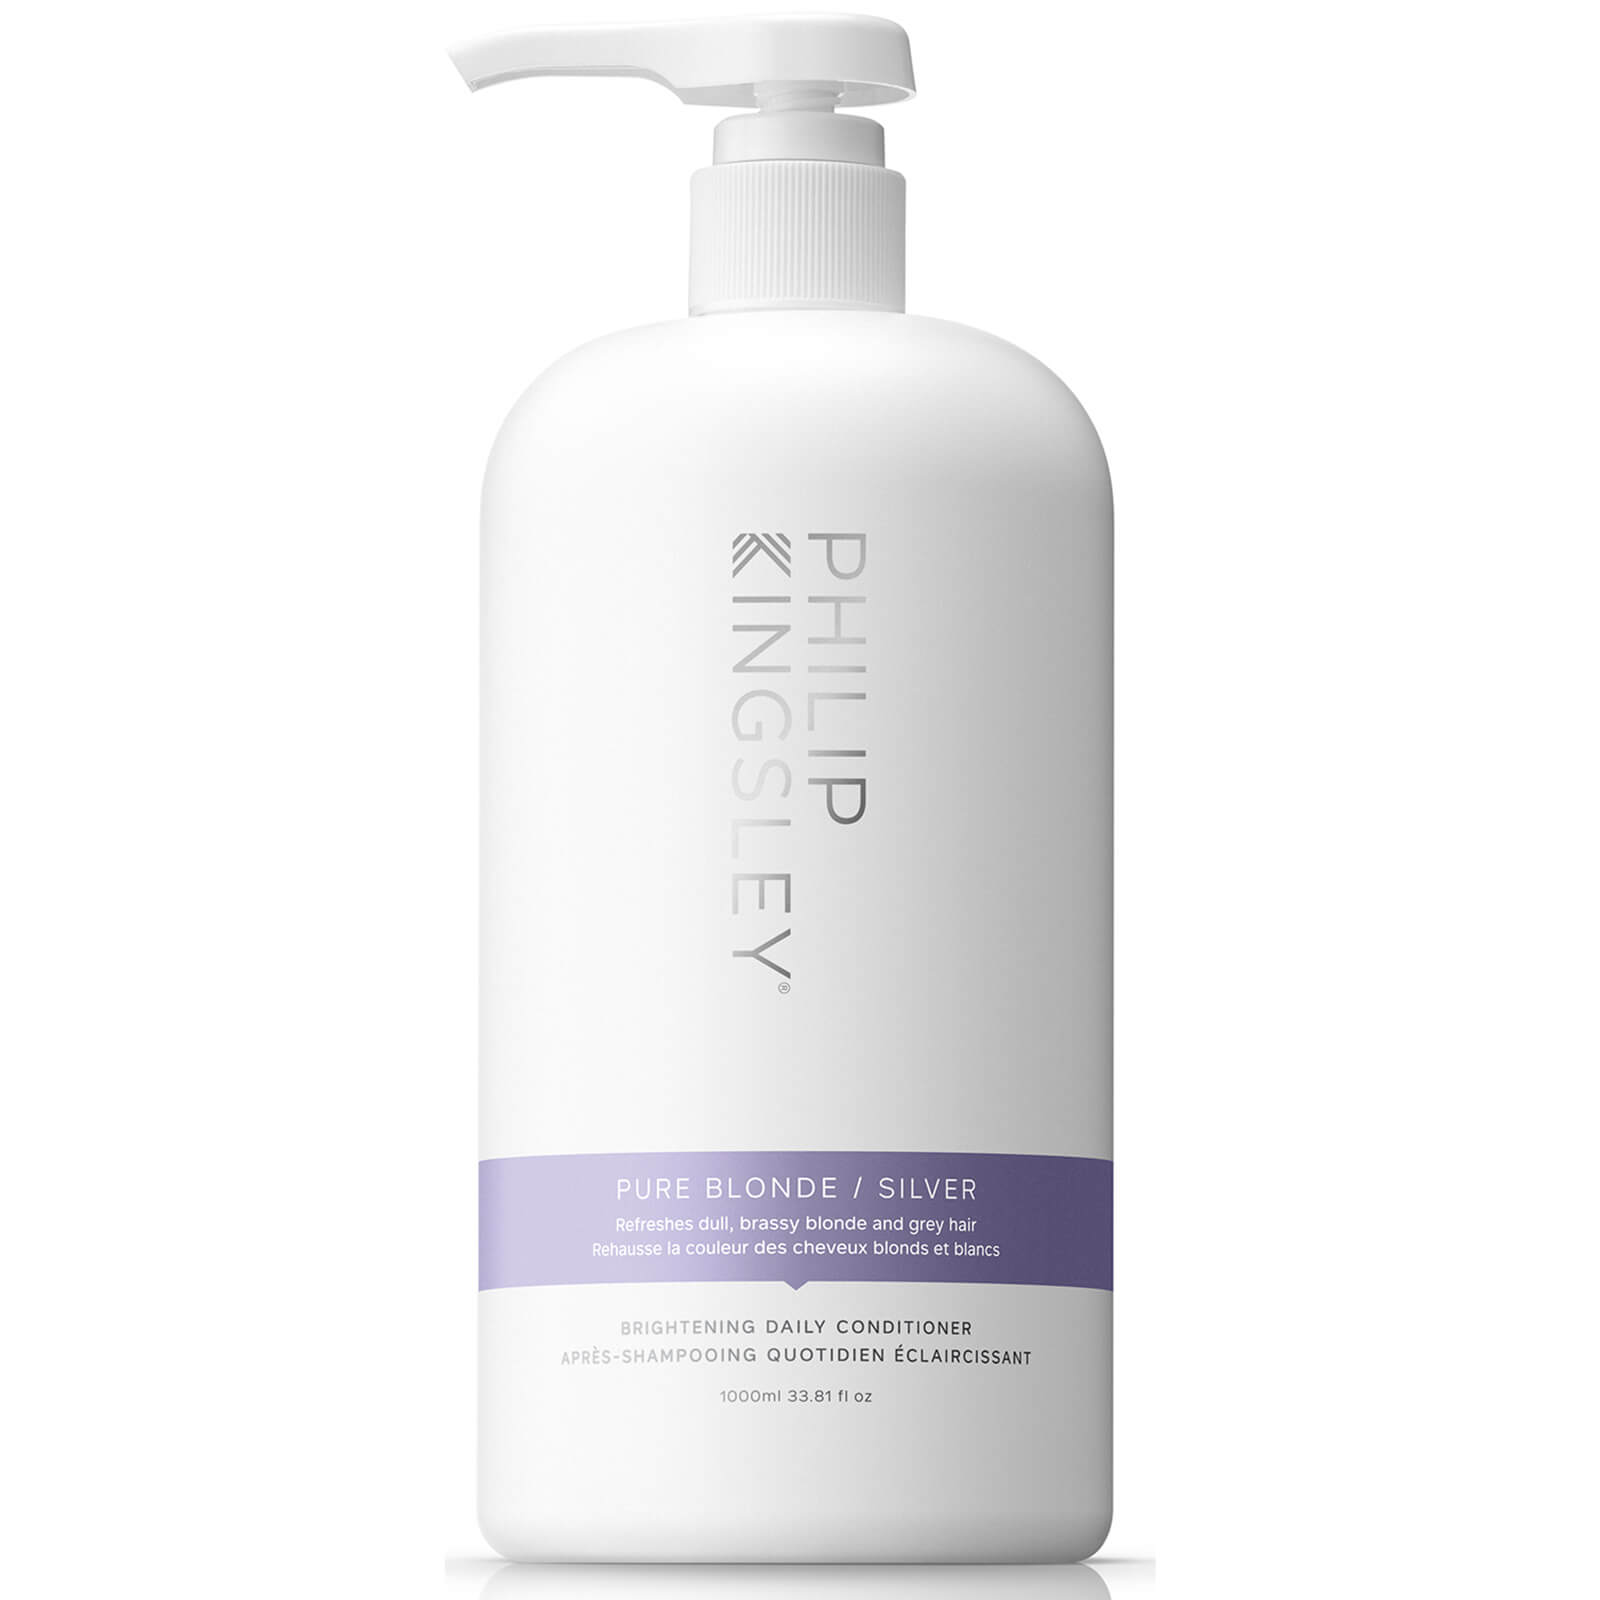 Image of Philip Kingsley Pure Blonde/Silver Brightening Daily Conditioner 1000ml